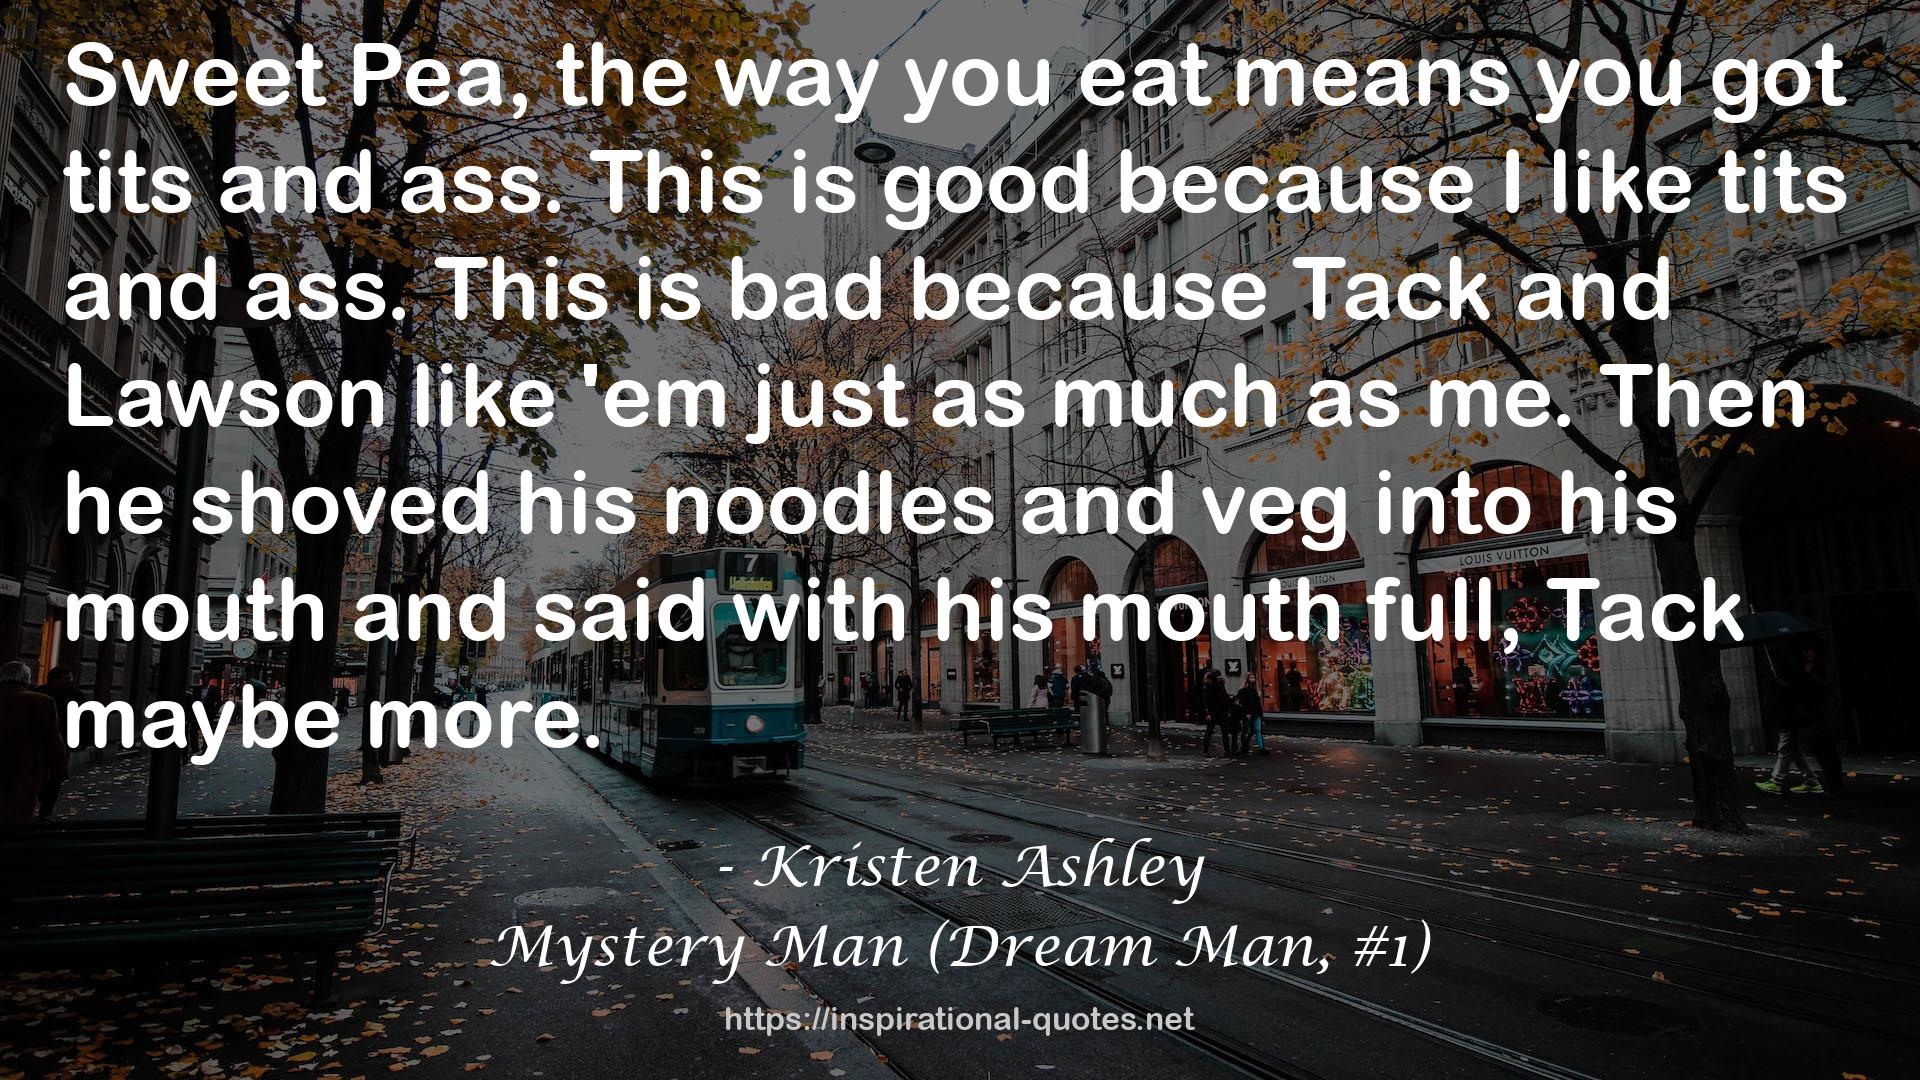 Mystery Man (Dream Man, #1) QUOTES